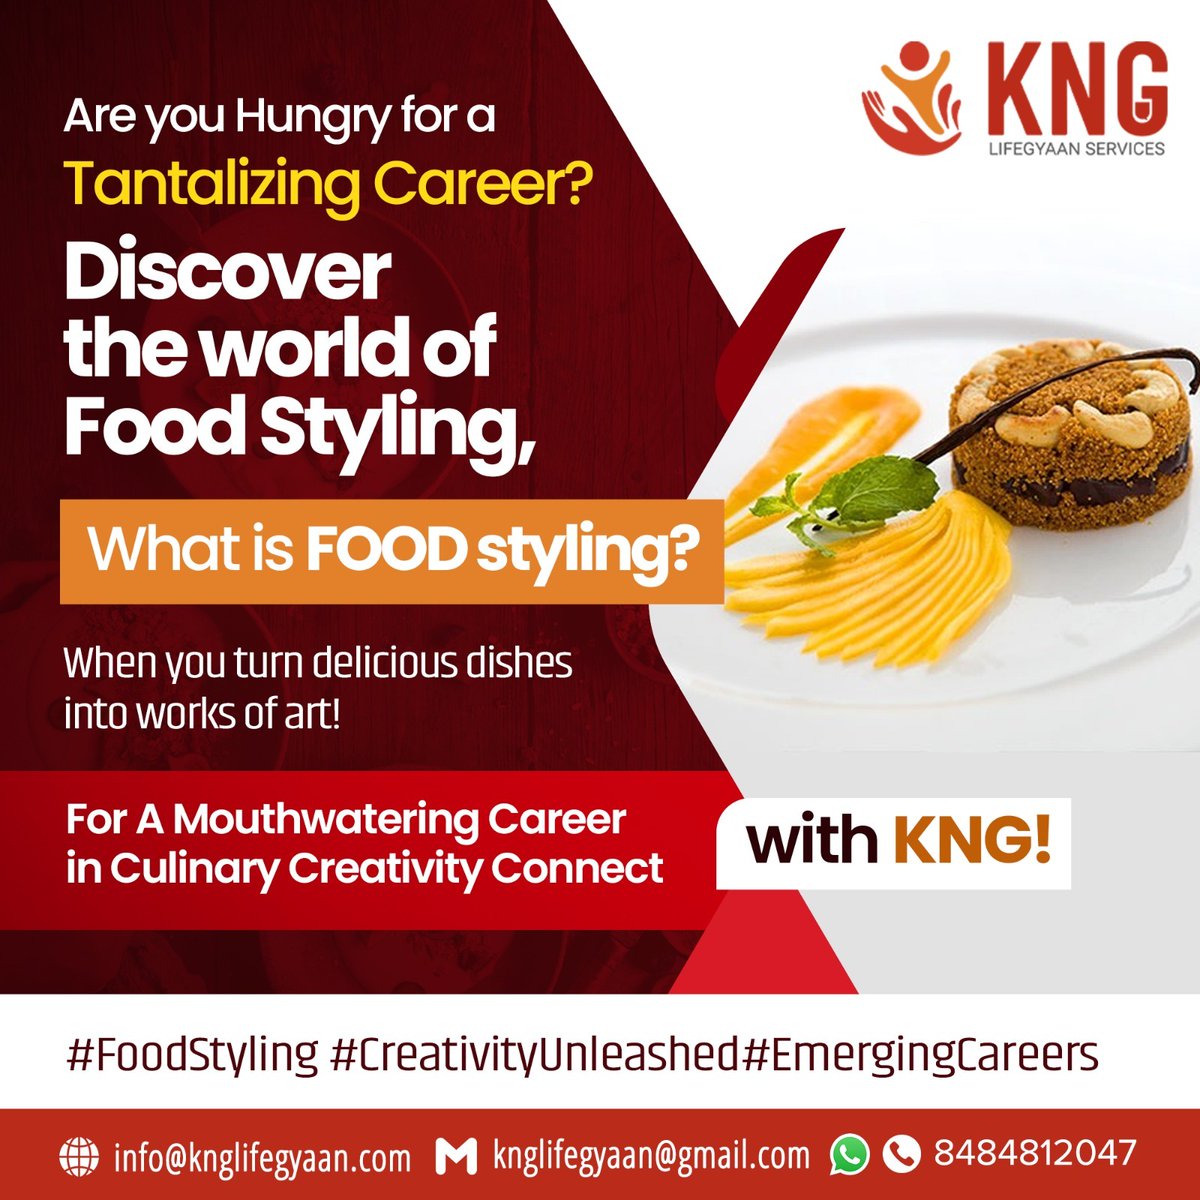 Are you Hungry for a Tantalizing Career? 
Discover the world of Food Styling, 
What is FOOD styling?
When you turn delicious dishes into works of art!
For A Mouthwatering Career in Culinary Creativity 
Connect with KNG!
🎨🌟 #FoodStyling #CreativityUnleashed #EmergingCareers